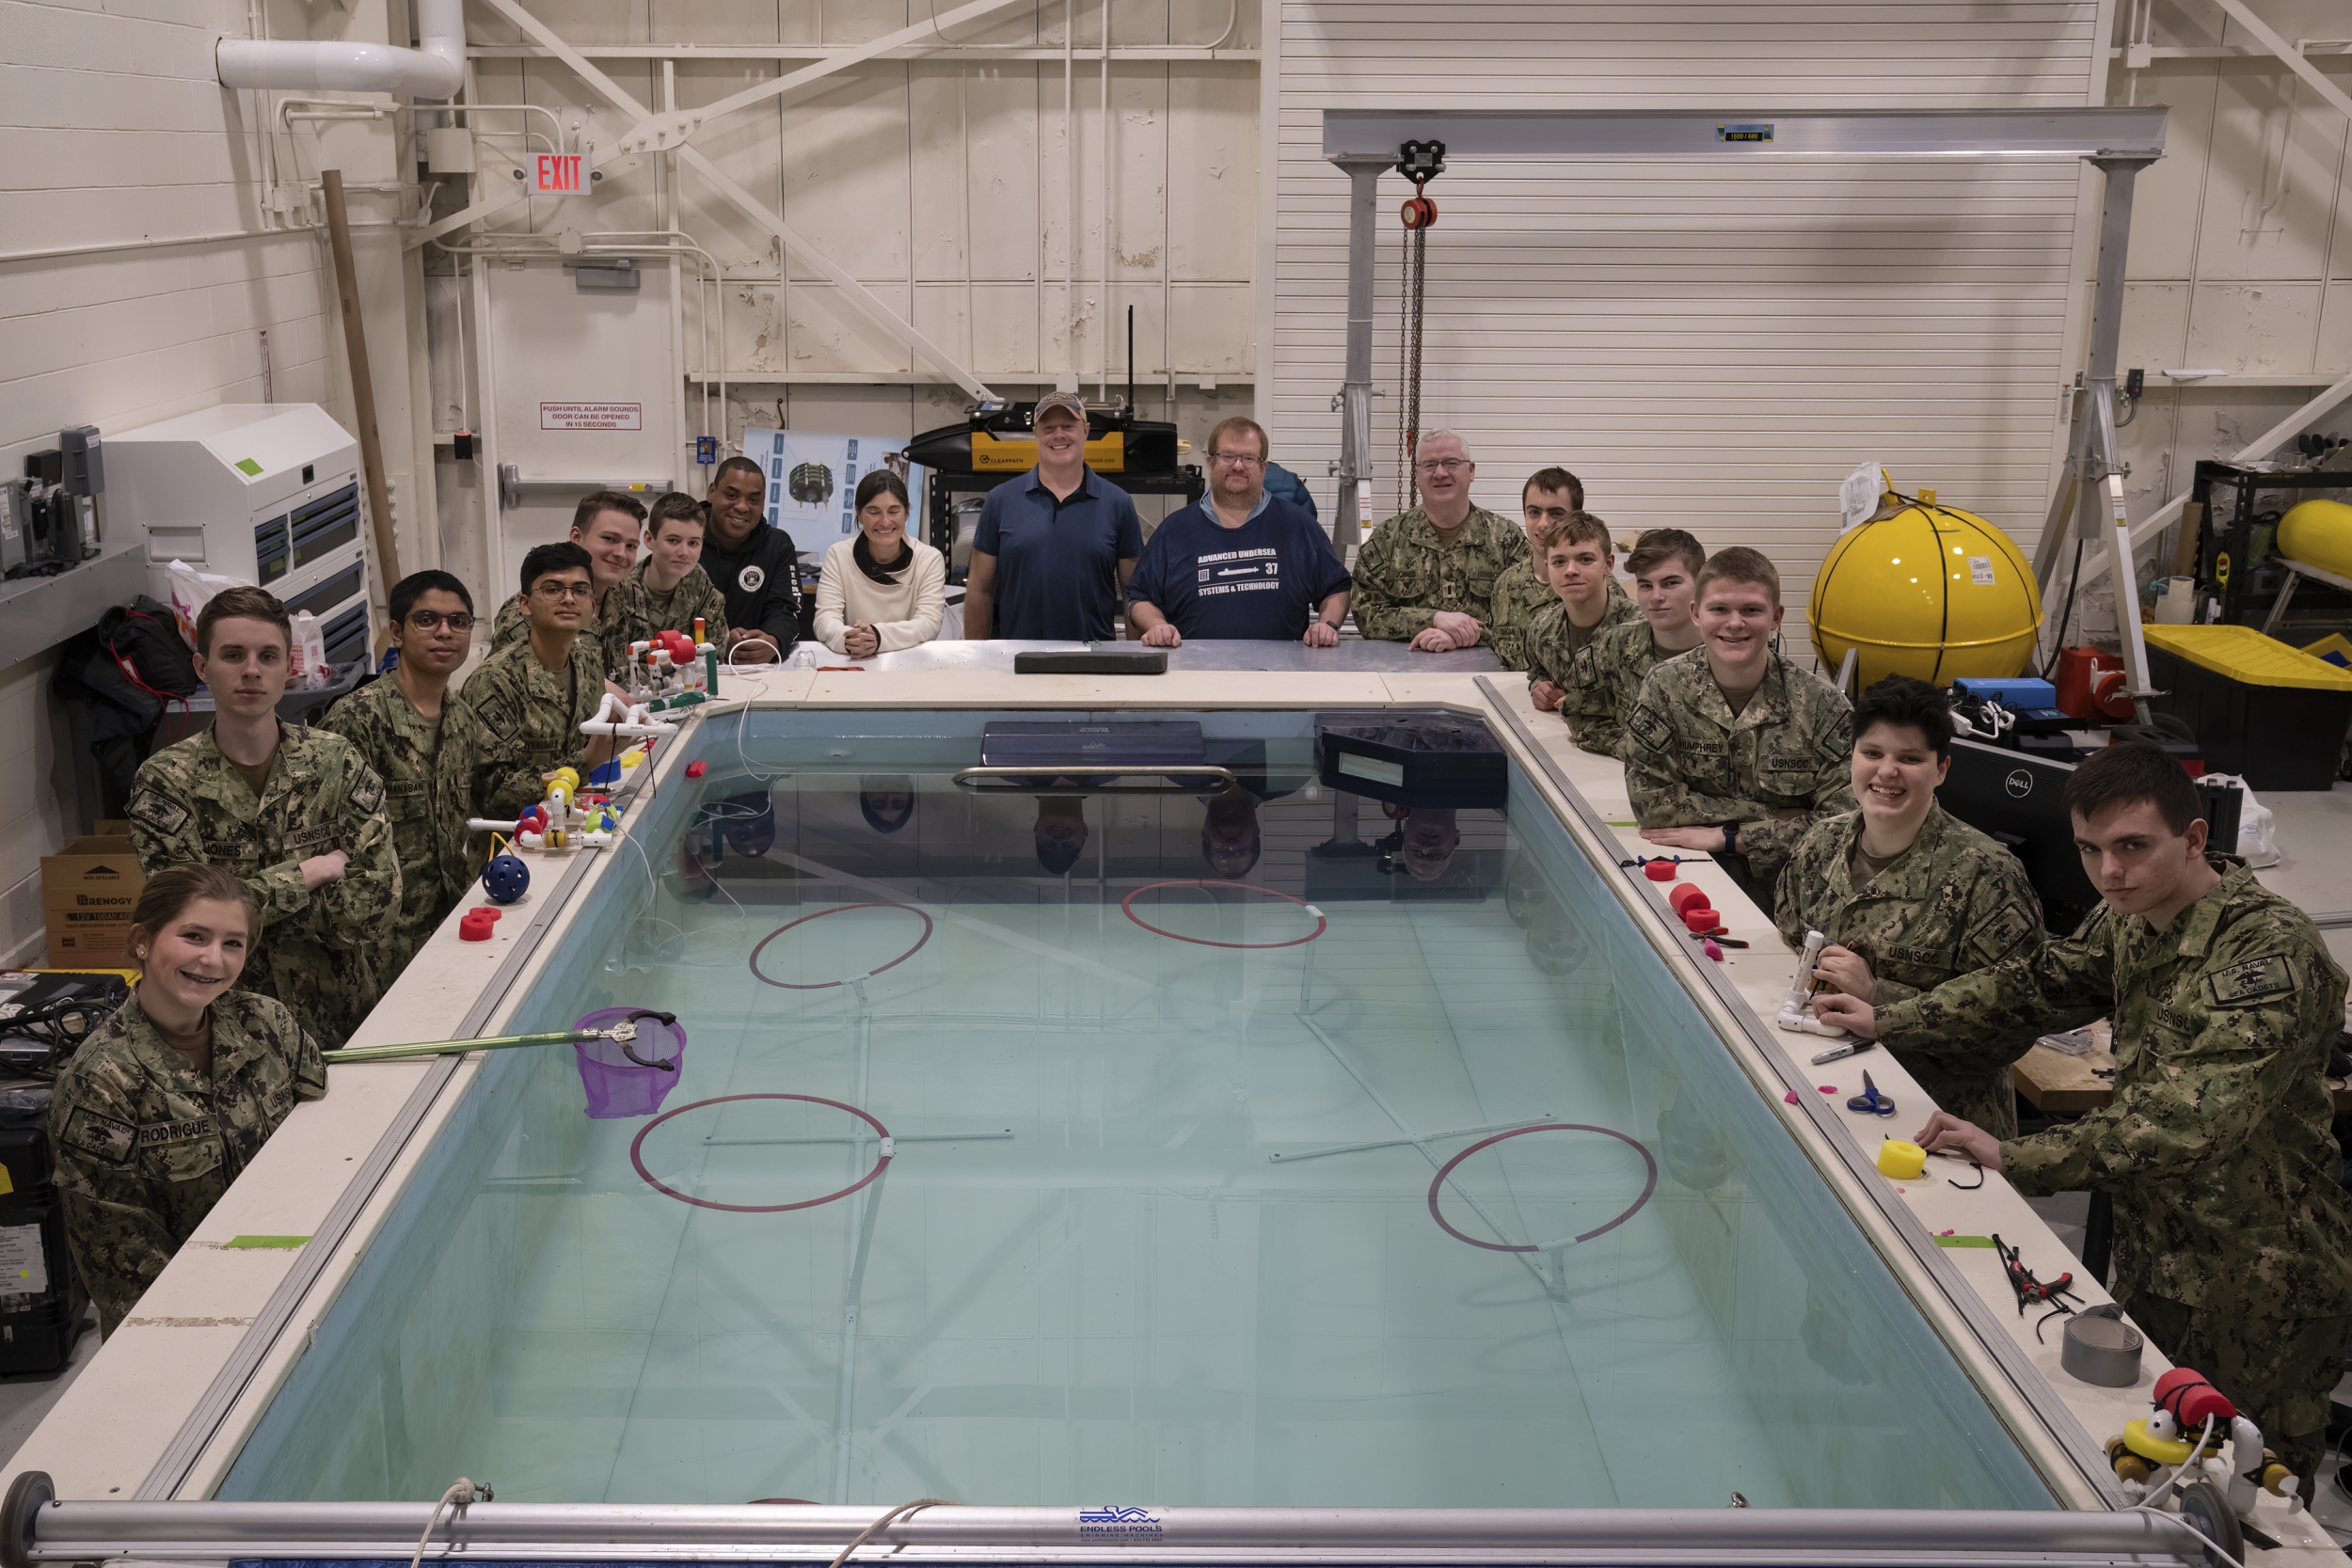 Five teams of cadets visited the Laboratory's test pool to prepare for an international underwater robotics competition. 